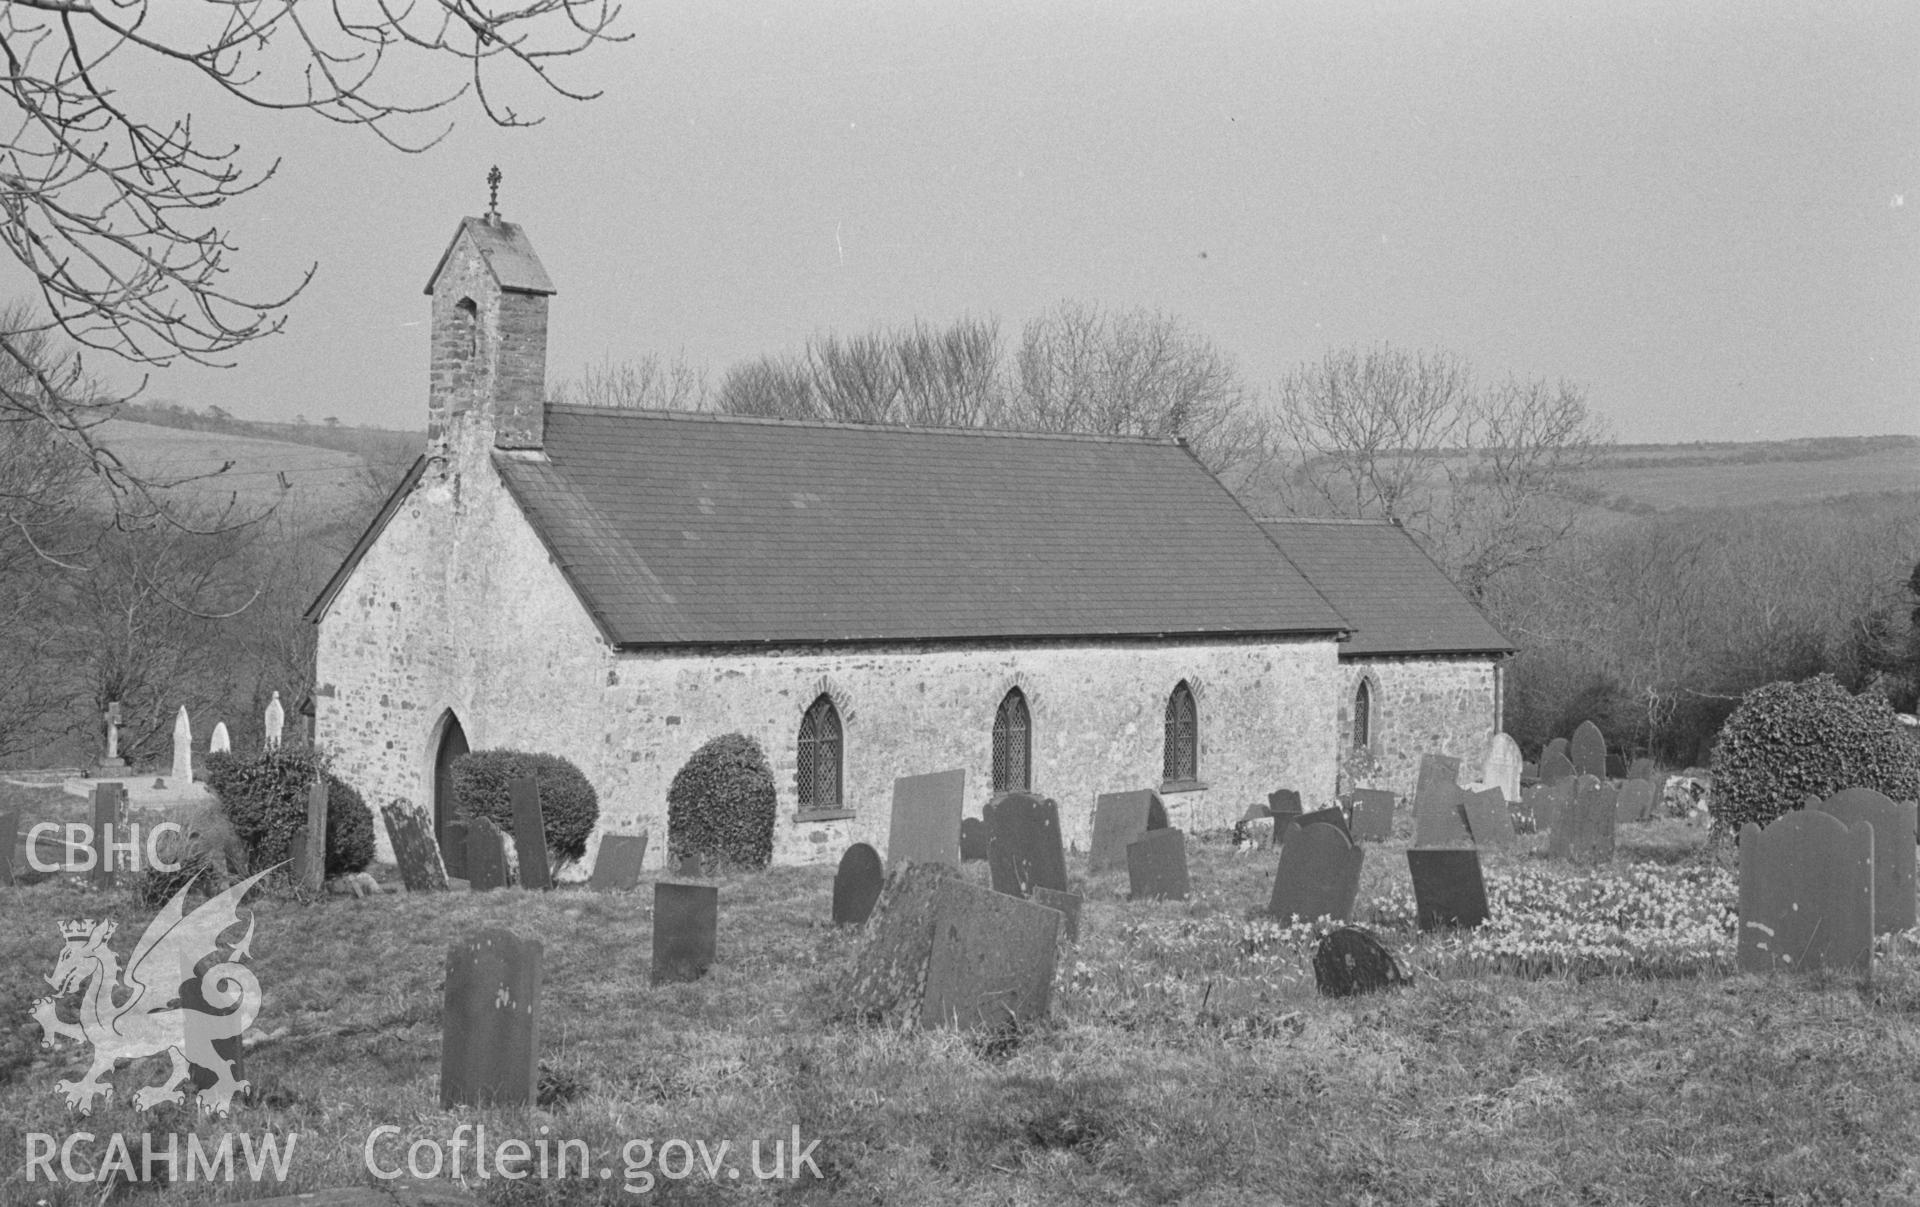 Black and White photograph showing Llandysiliogogo parish church, with daffodils in flower. Photographed by Arthur Chater in April 1963 from Grid Reference SN 365 575, looking north-east.